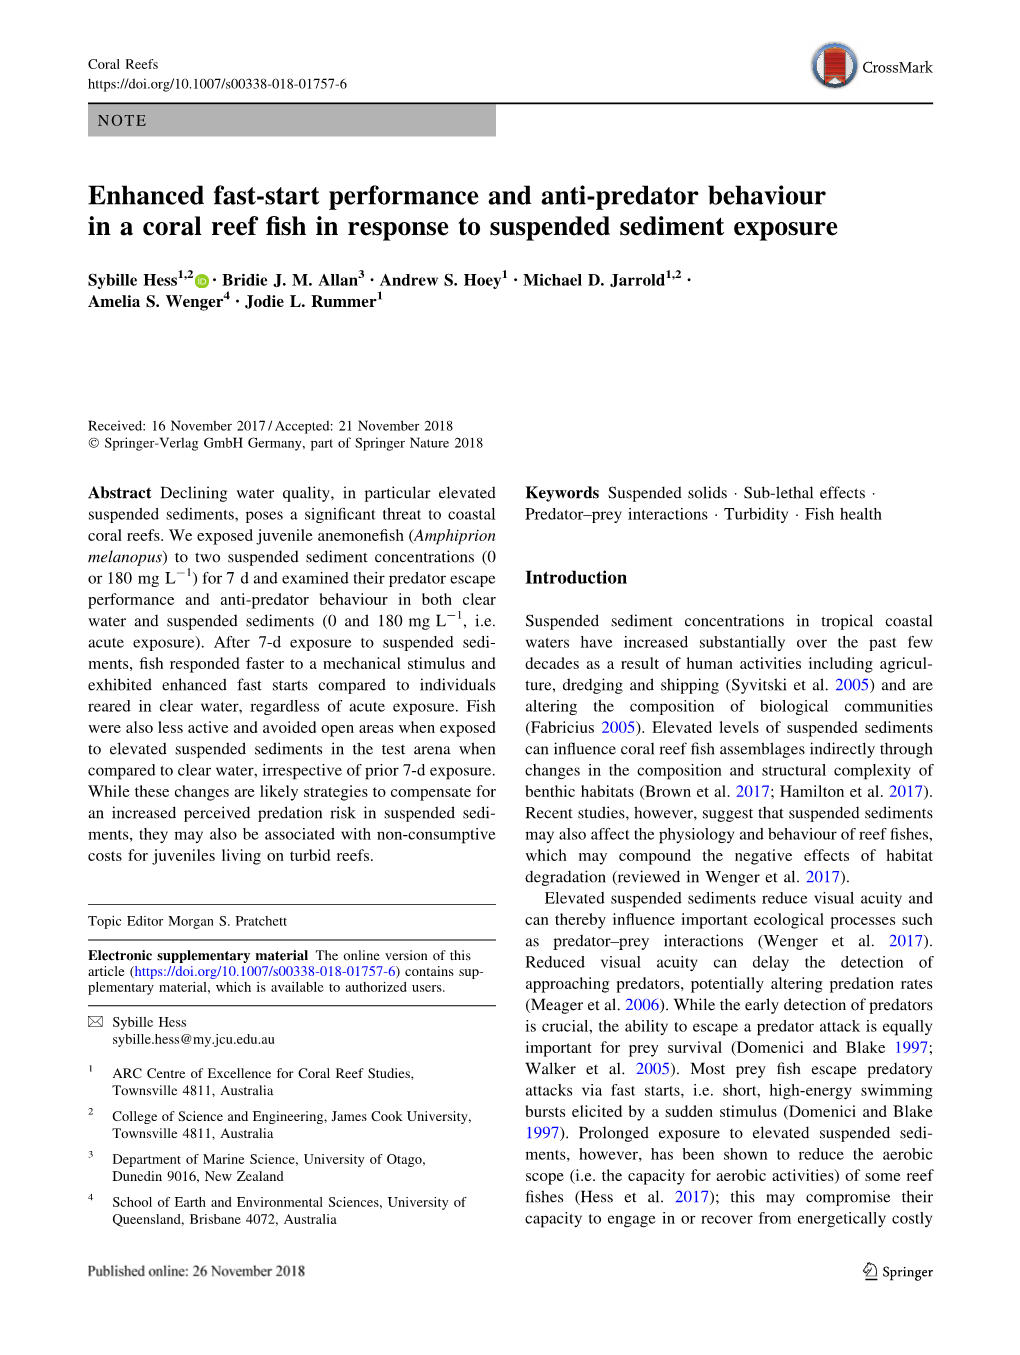 Enhanced Fast-Start Performance and Anti-Predator Behaviour in a Coral Reef ﬁsh in Response to Suspended Sediment Exposure